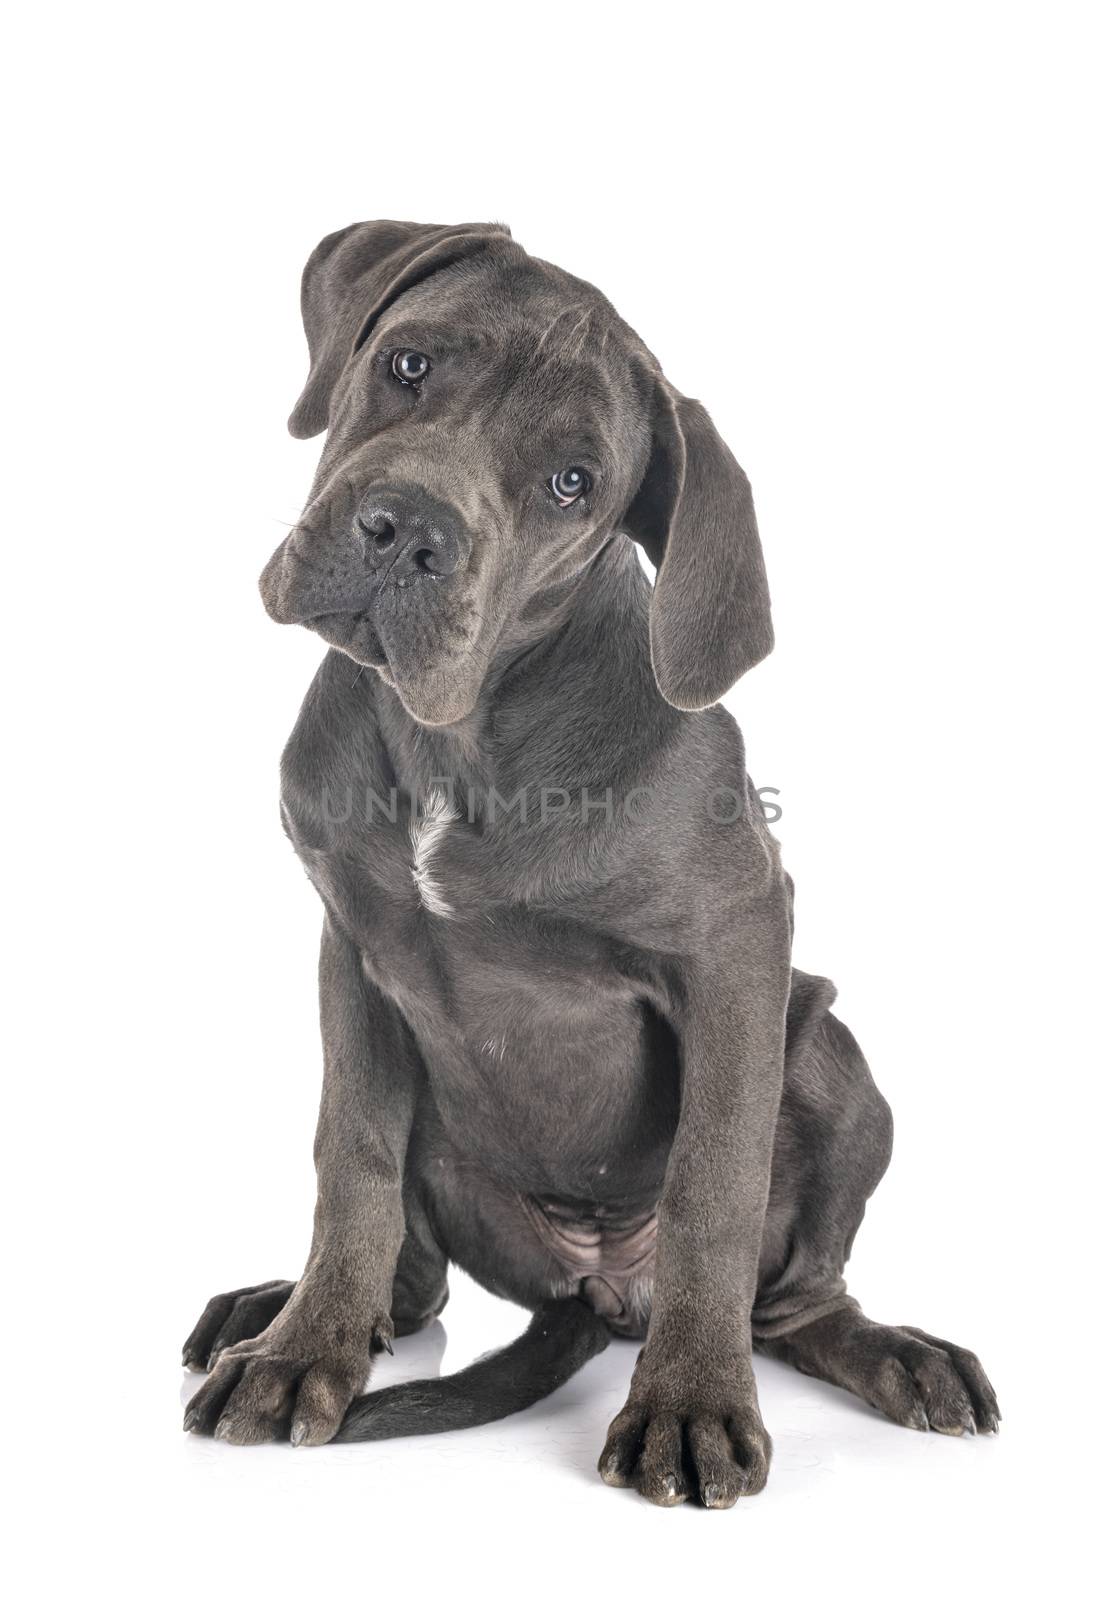 puppy great dane in front of white background